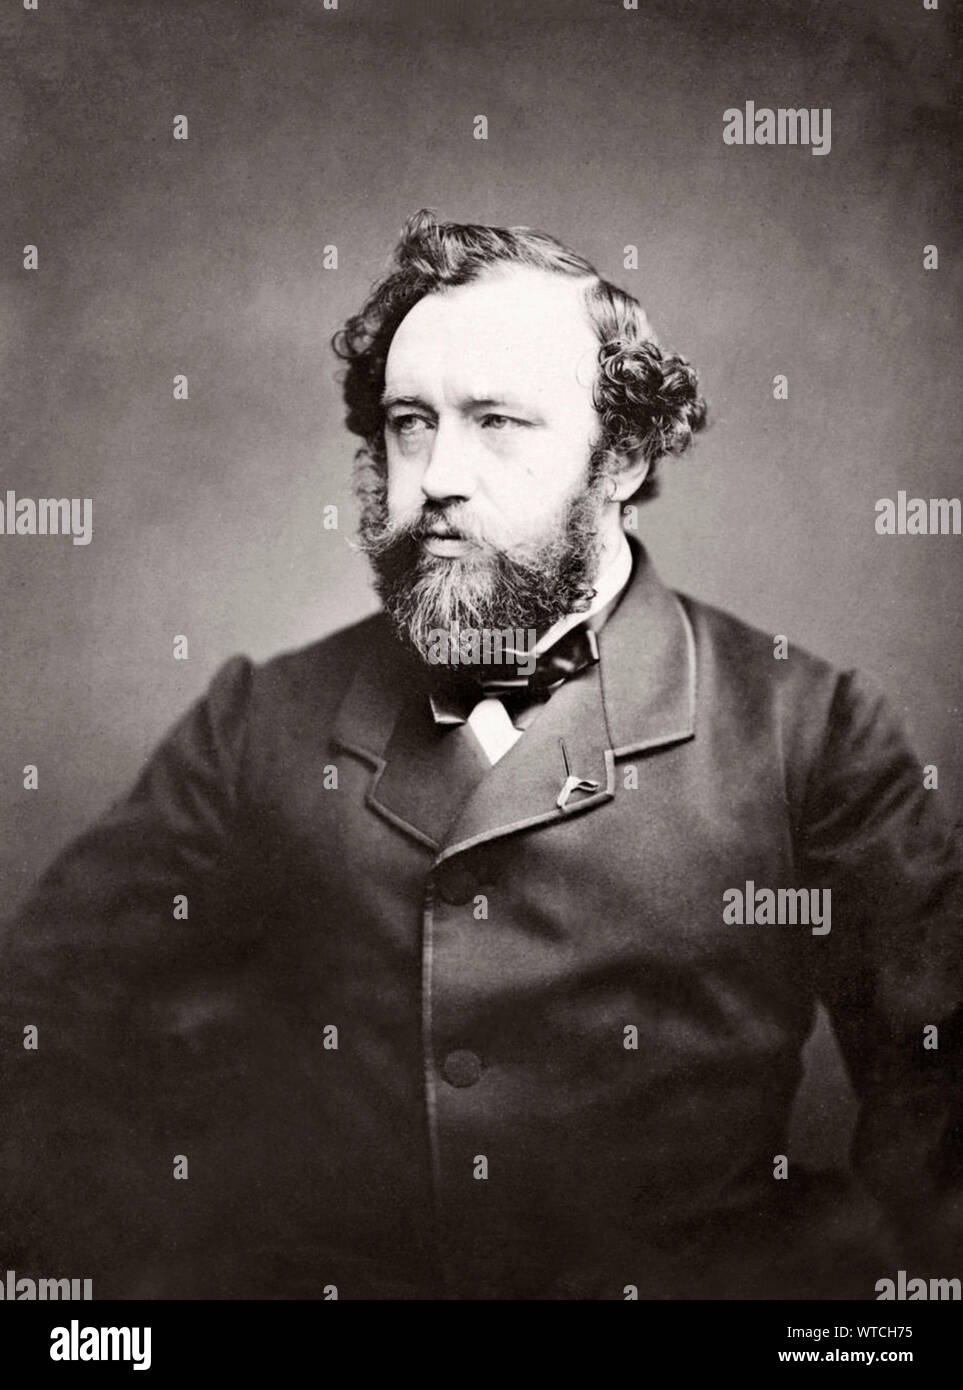 Antoine-Joseph "Adolphe" Sax (1814 – 1894) was a Belgian inventor and  musician who created the saxophone in the early 1840s, patenting it in  1846. He Stock Photo - Alamy